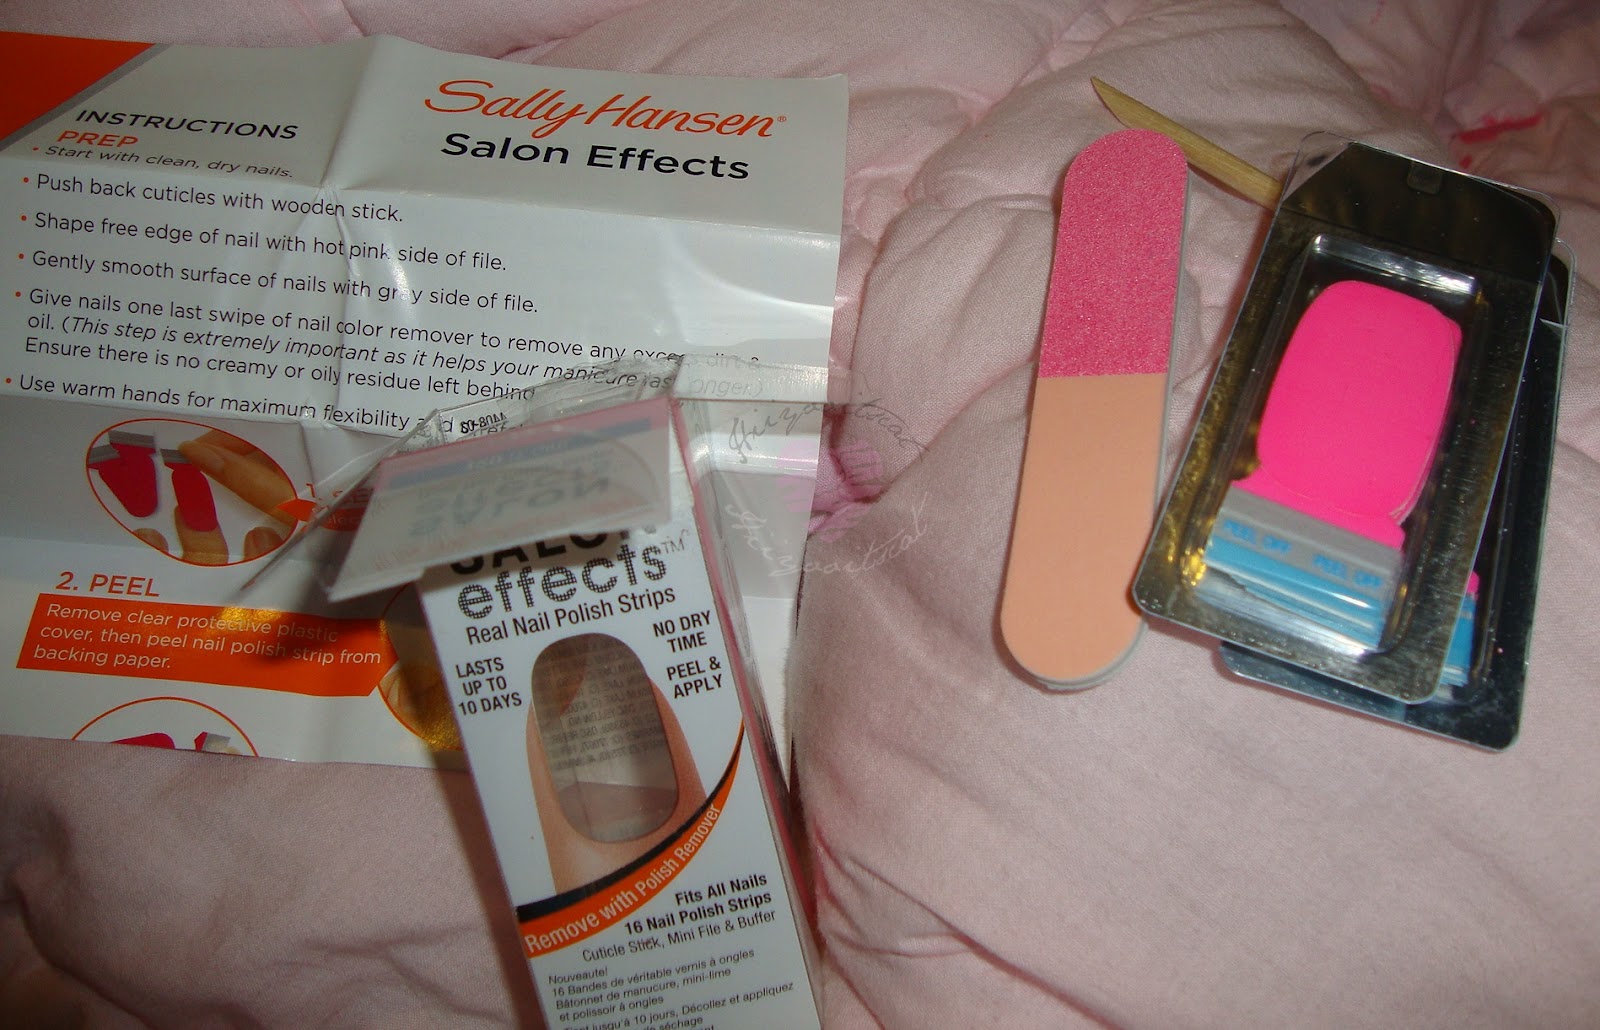 They give 16 nail polish strips that vary in sizes to fit every nail size,